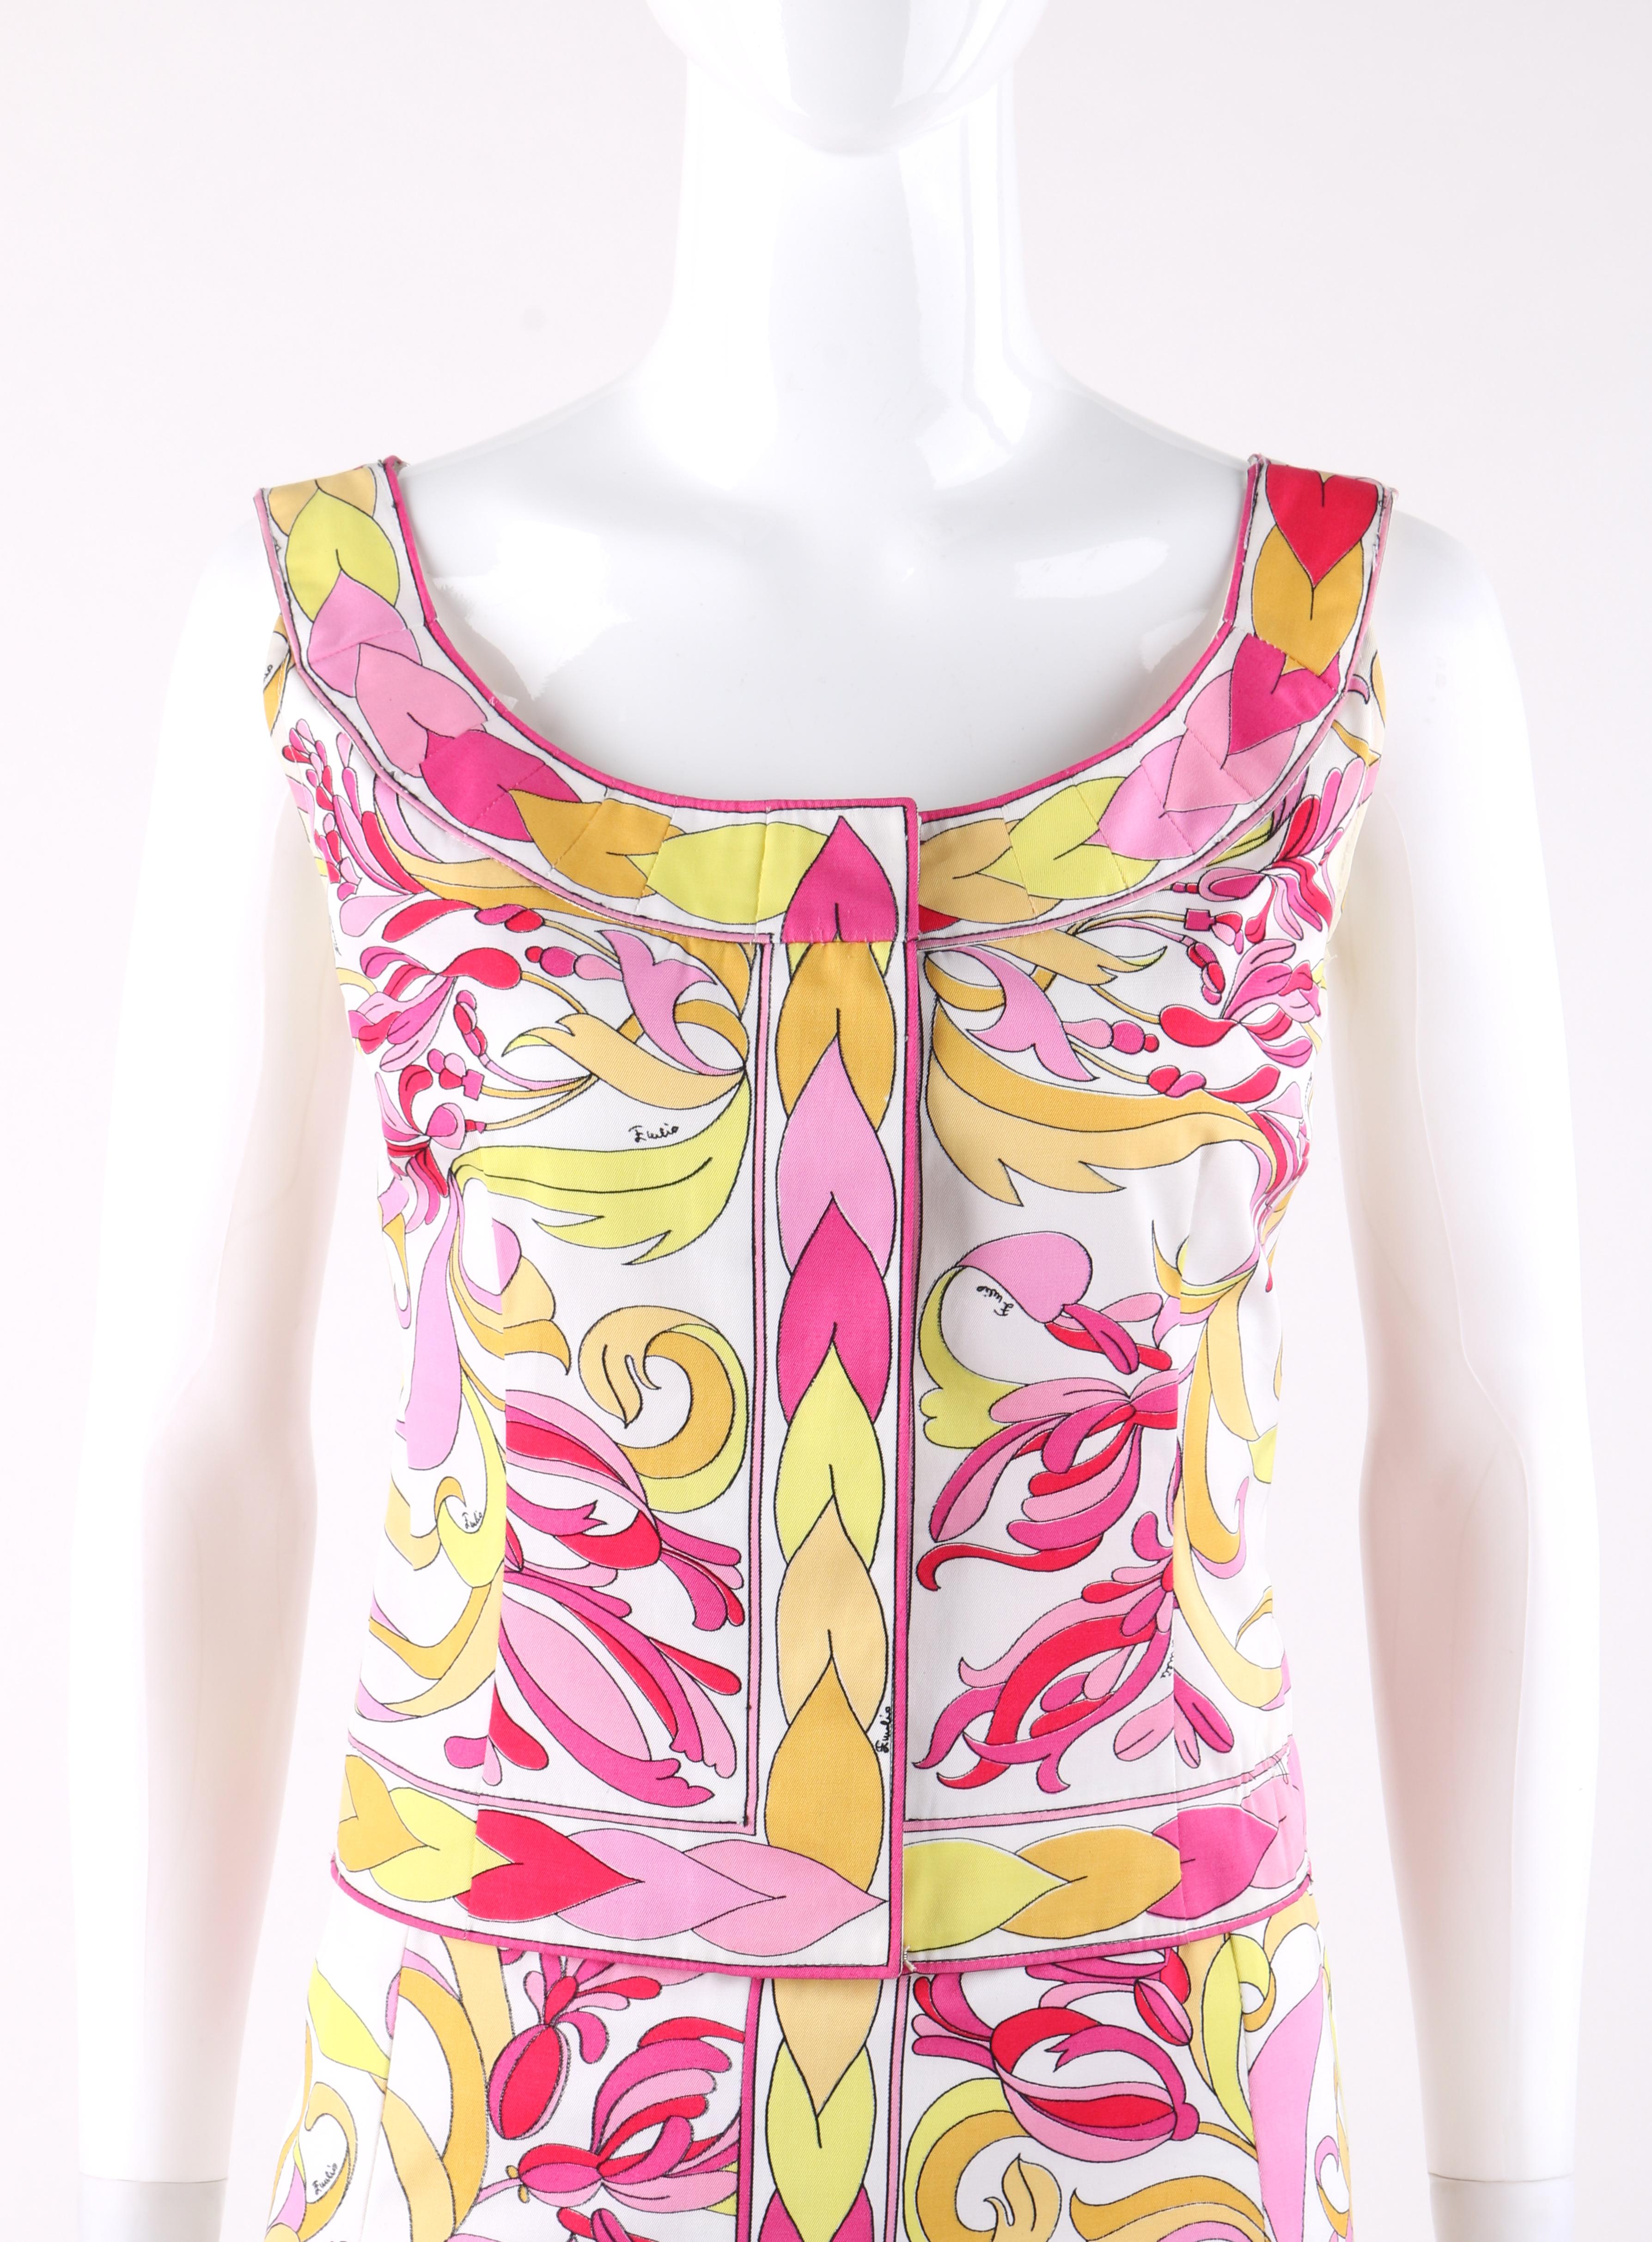 EMILIO PUCCI c.1970’s 2pc Multi-Color Signature Print Top Skirt Dress Set
 
Circa: 1970’s 
Label(s): Emilio Pucci 
Style: Tank top, a-line skirt
Color(s): Shades of pink, orange, yellow, white and black. 
Lined: No
Marked Fabric Content: 100% Cotton